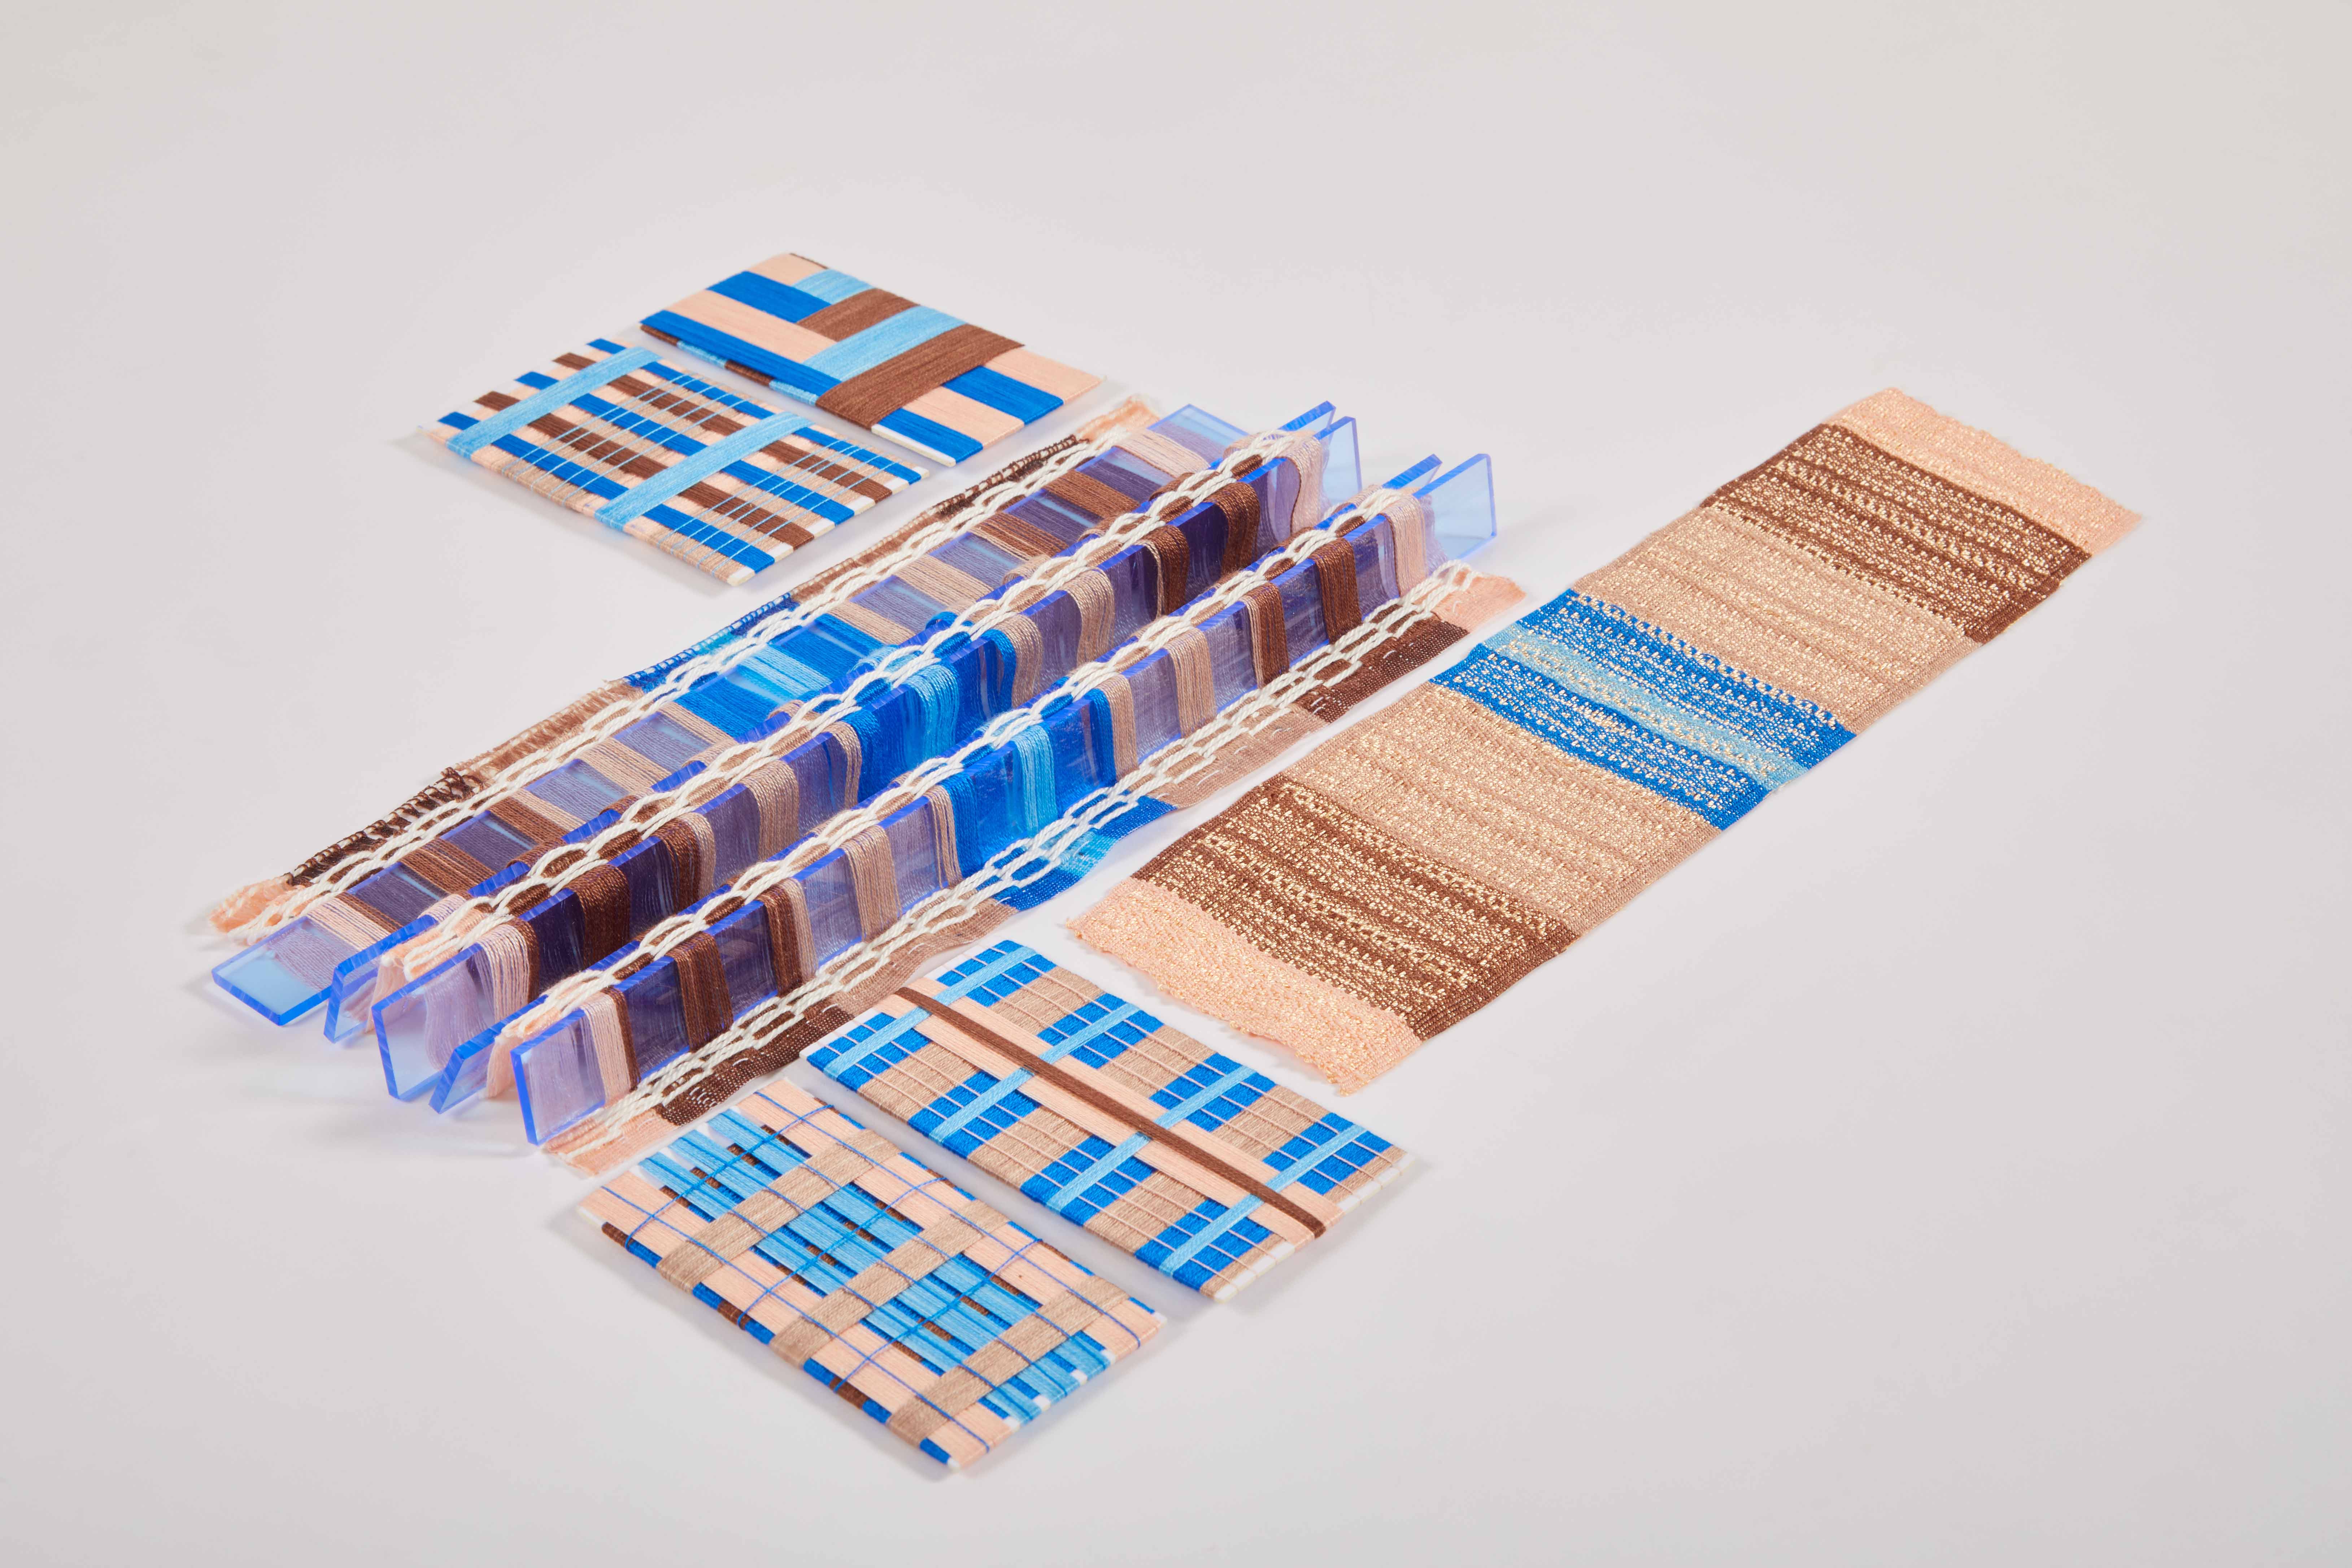 Photograph of woven textiles showing structure of fabric to give sea glass effect. Colours are blue purple and beige neutrals.